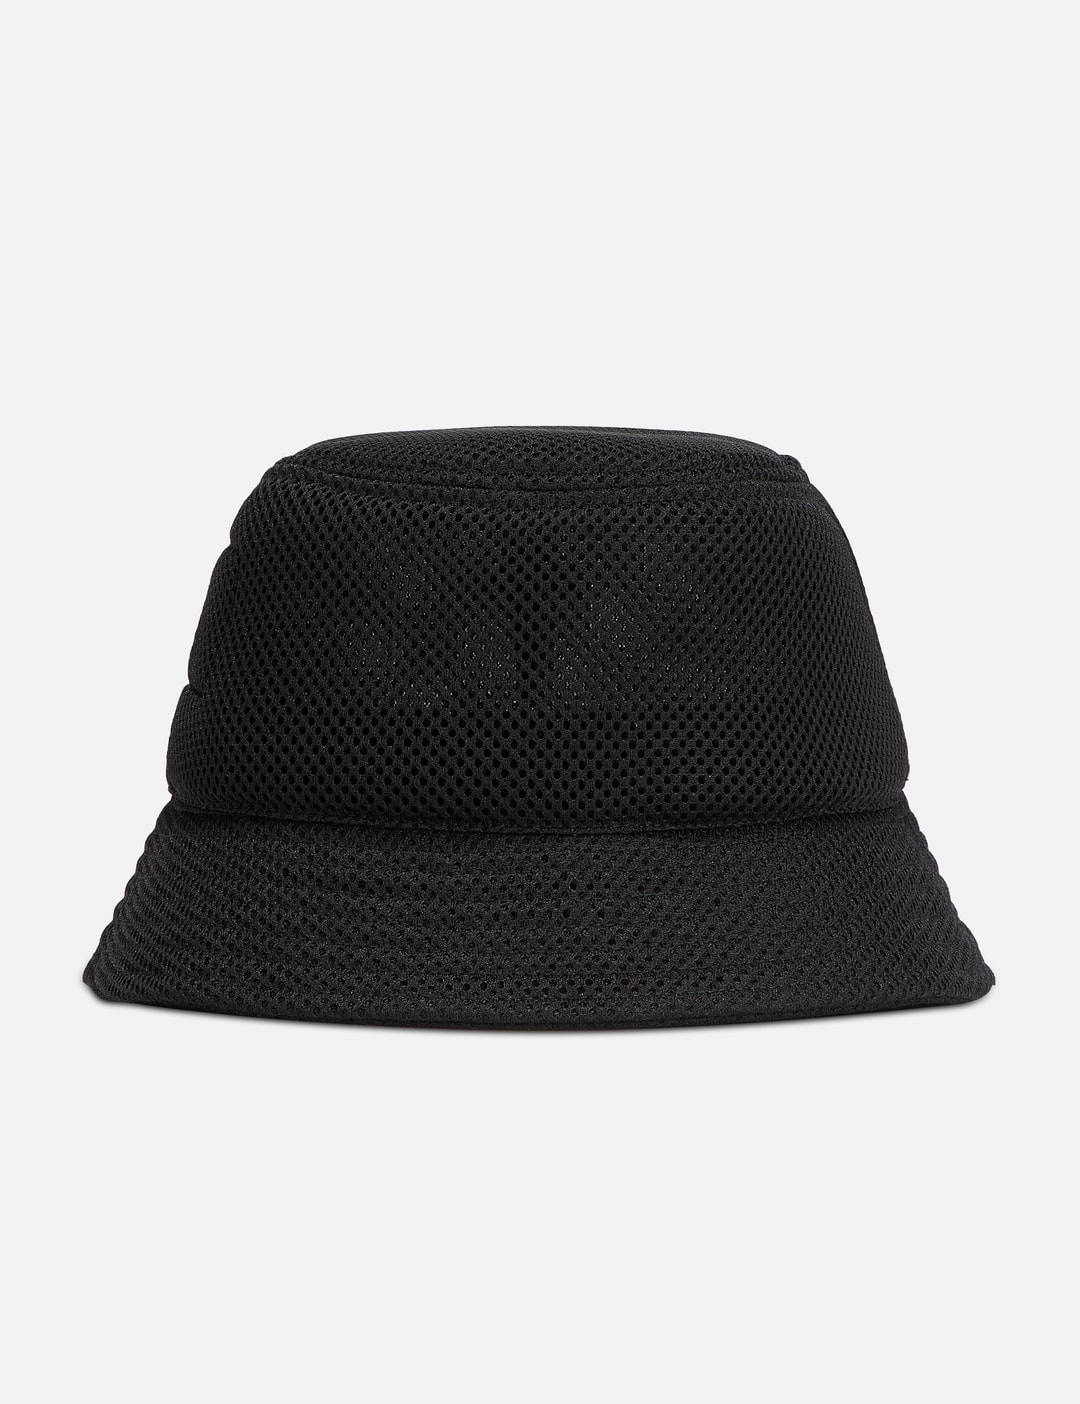 Rick Owens - Owens X Champion Gilligan Bucket | HBX - Globally Curated Fashion and Lifestyle by Hypebeast